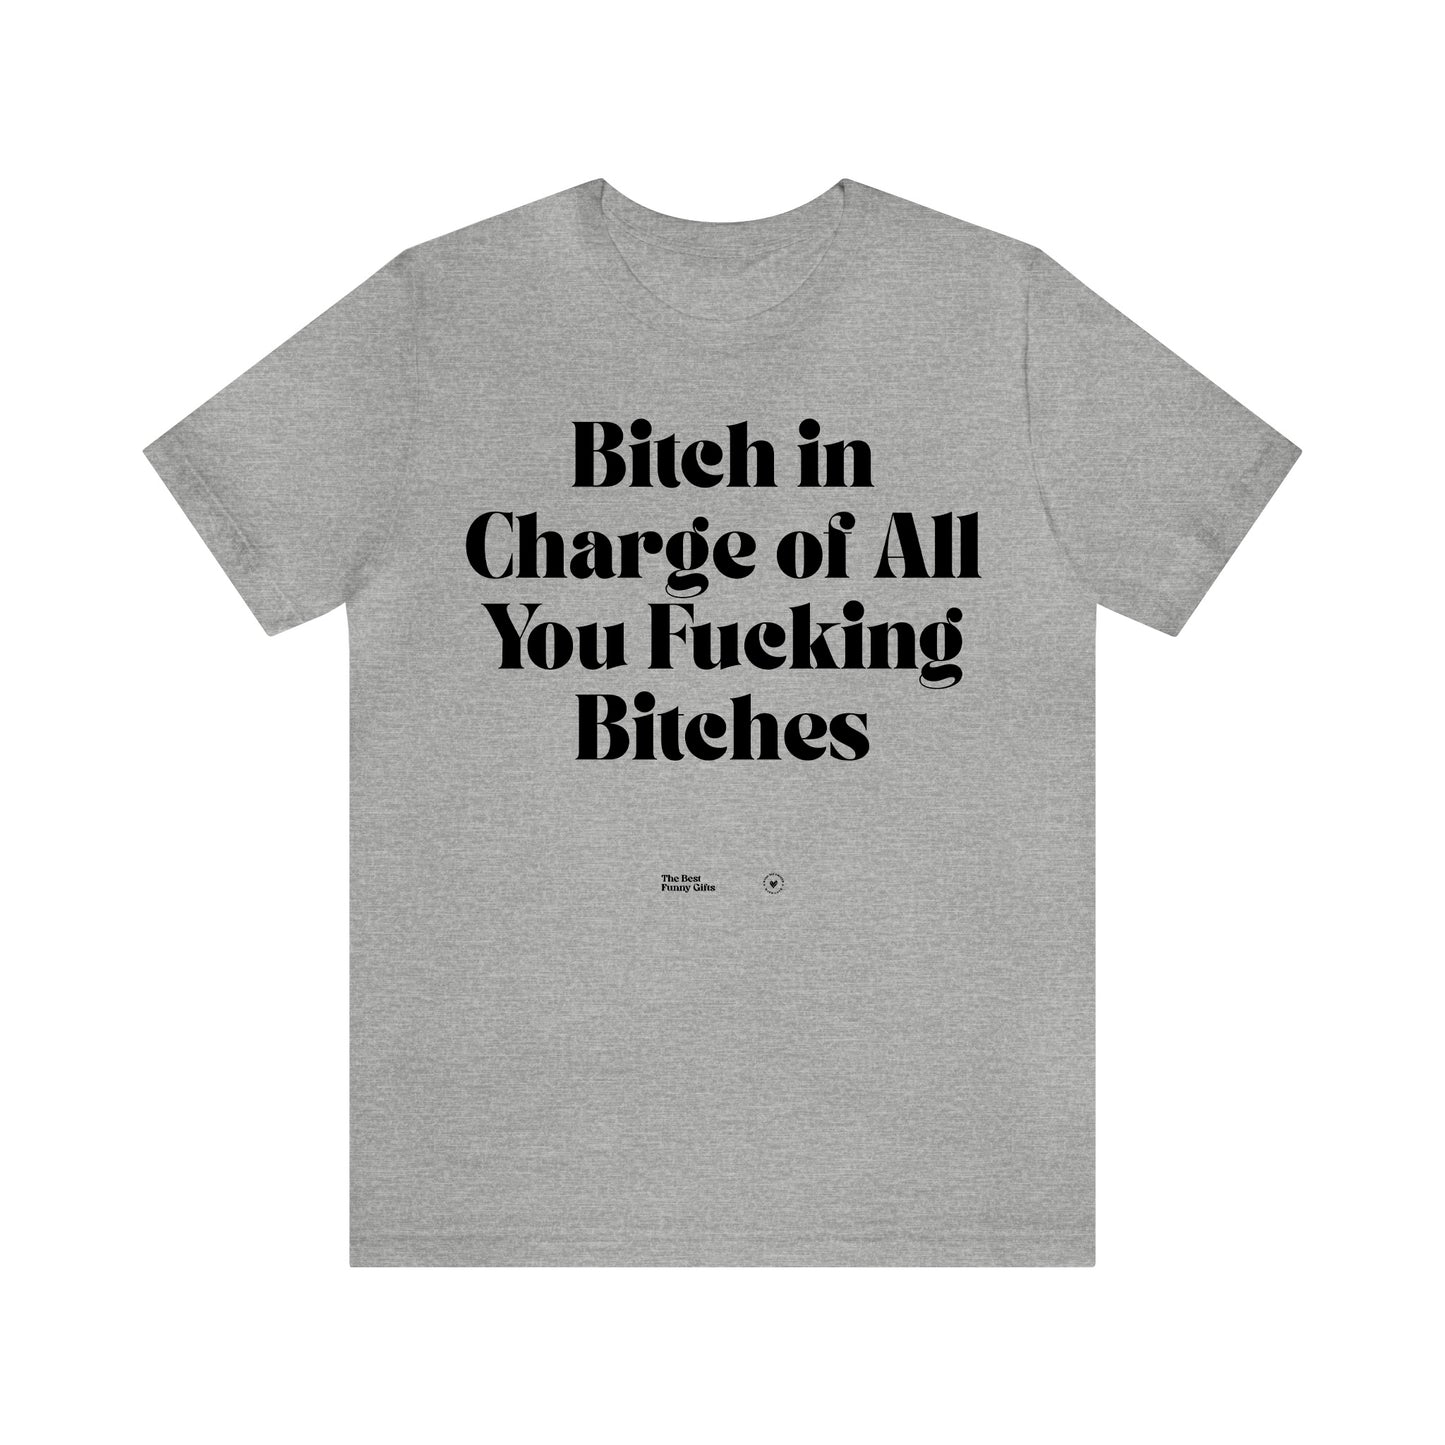 Funny Shirts for Women - Bitch in Charge of All You Fucking Bitches - Women’s T Shirts